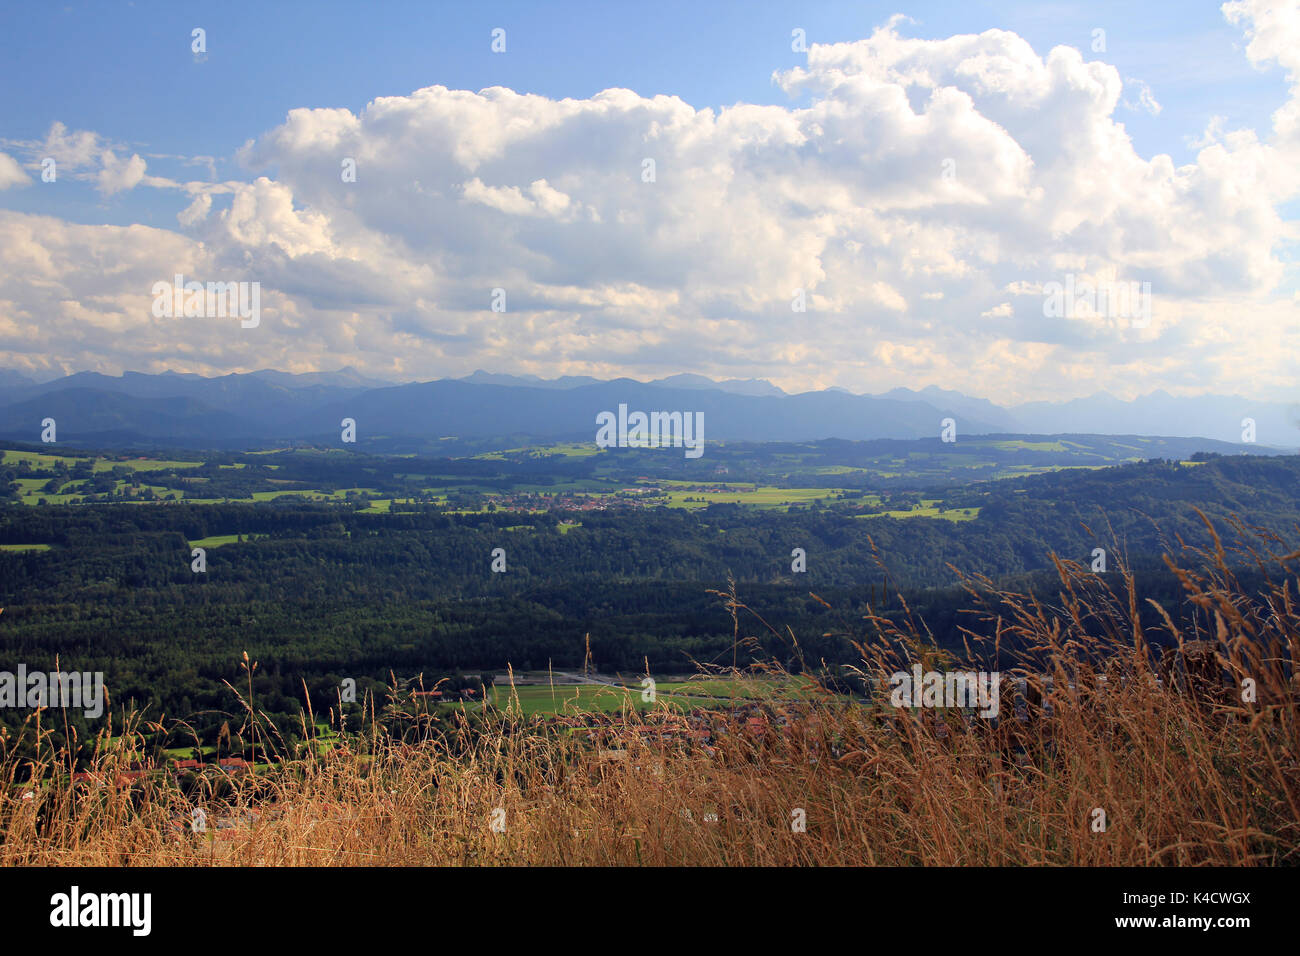 View From Hoher Pei enberg, Pfaffenwinkel, Upper Bavaria, To The Foothills Of The Alps Stock Photo